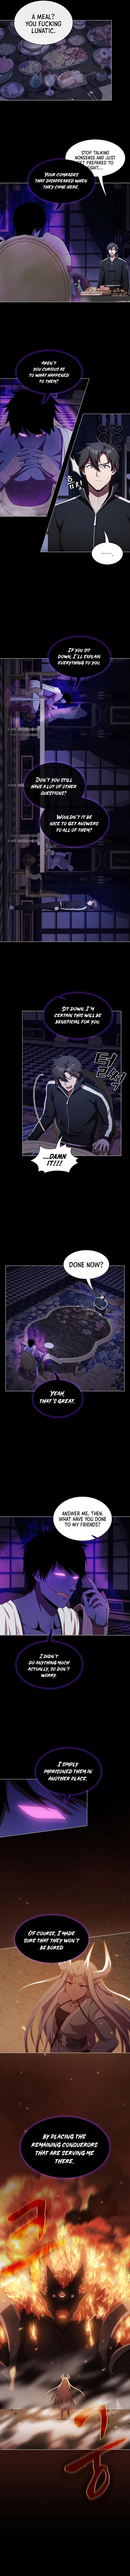 The Tutorial Tower of the Advanced Player - Chapter 152 Page 4